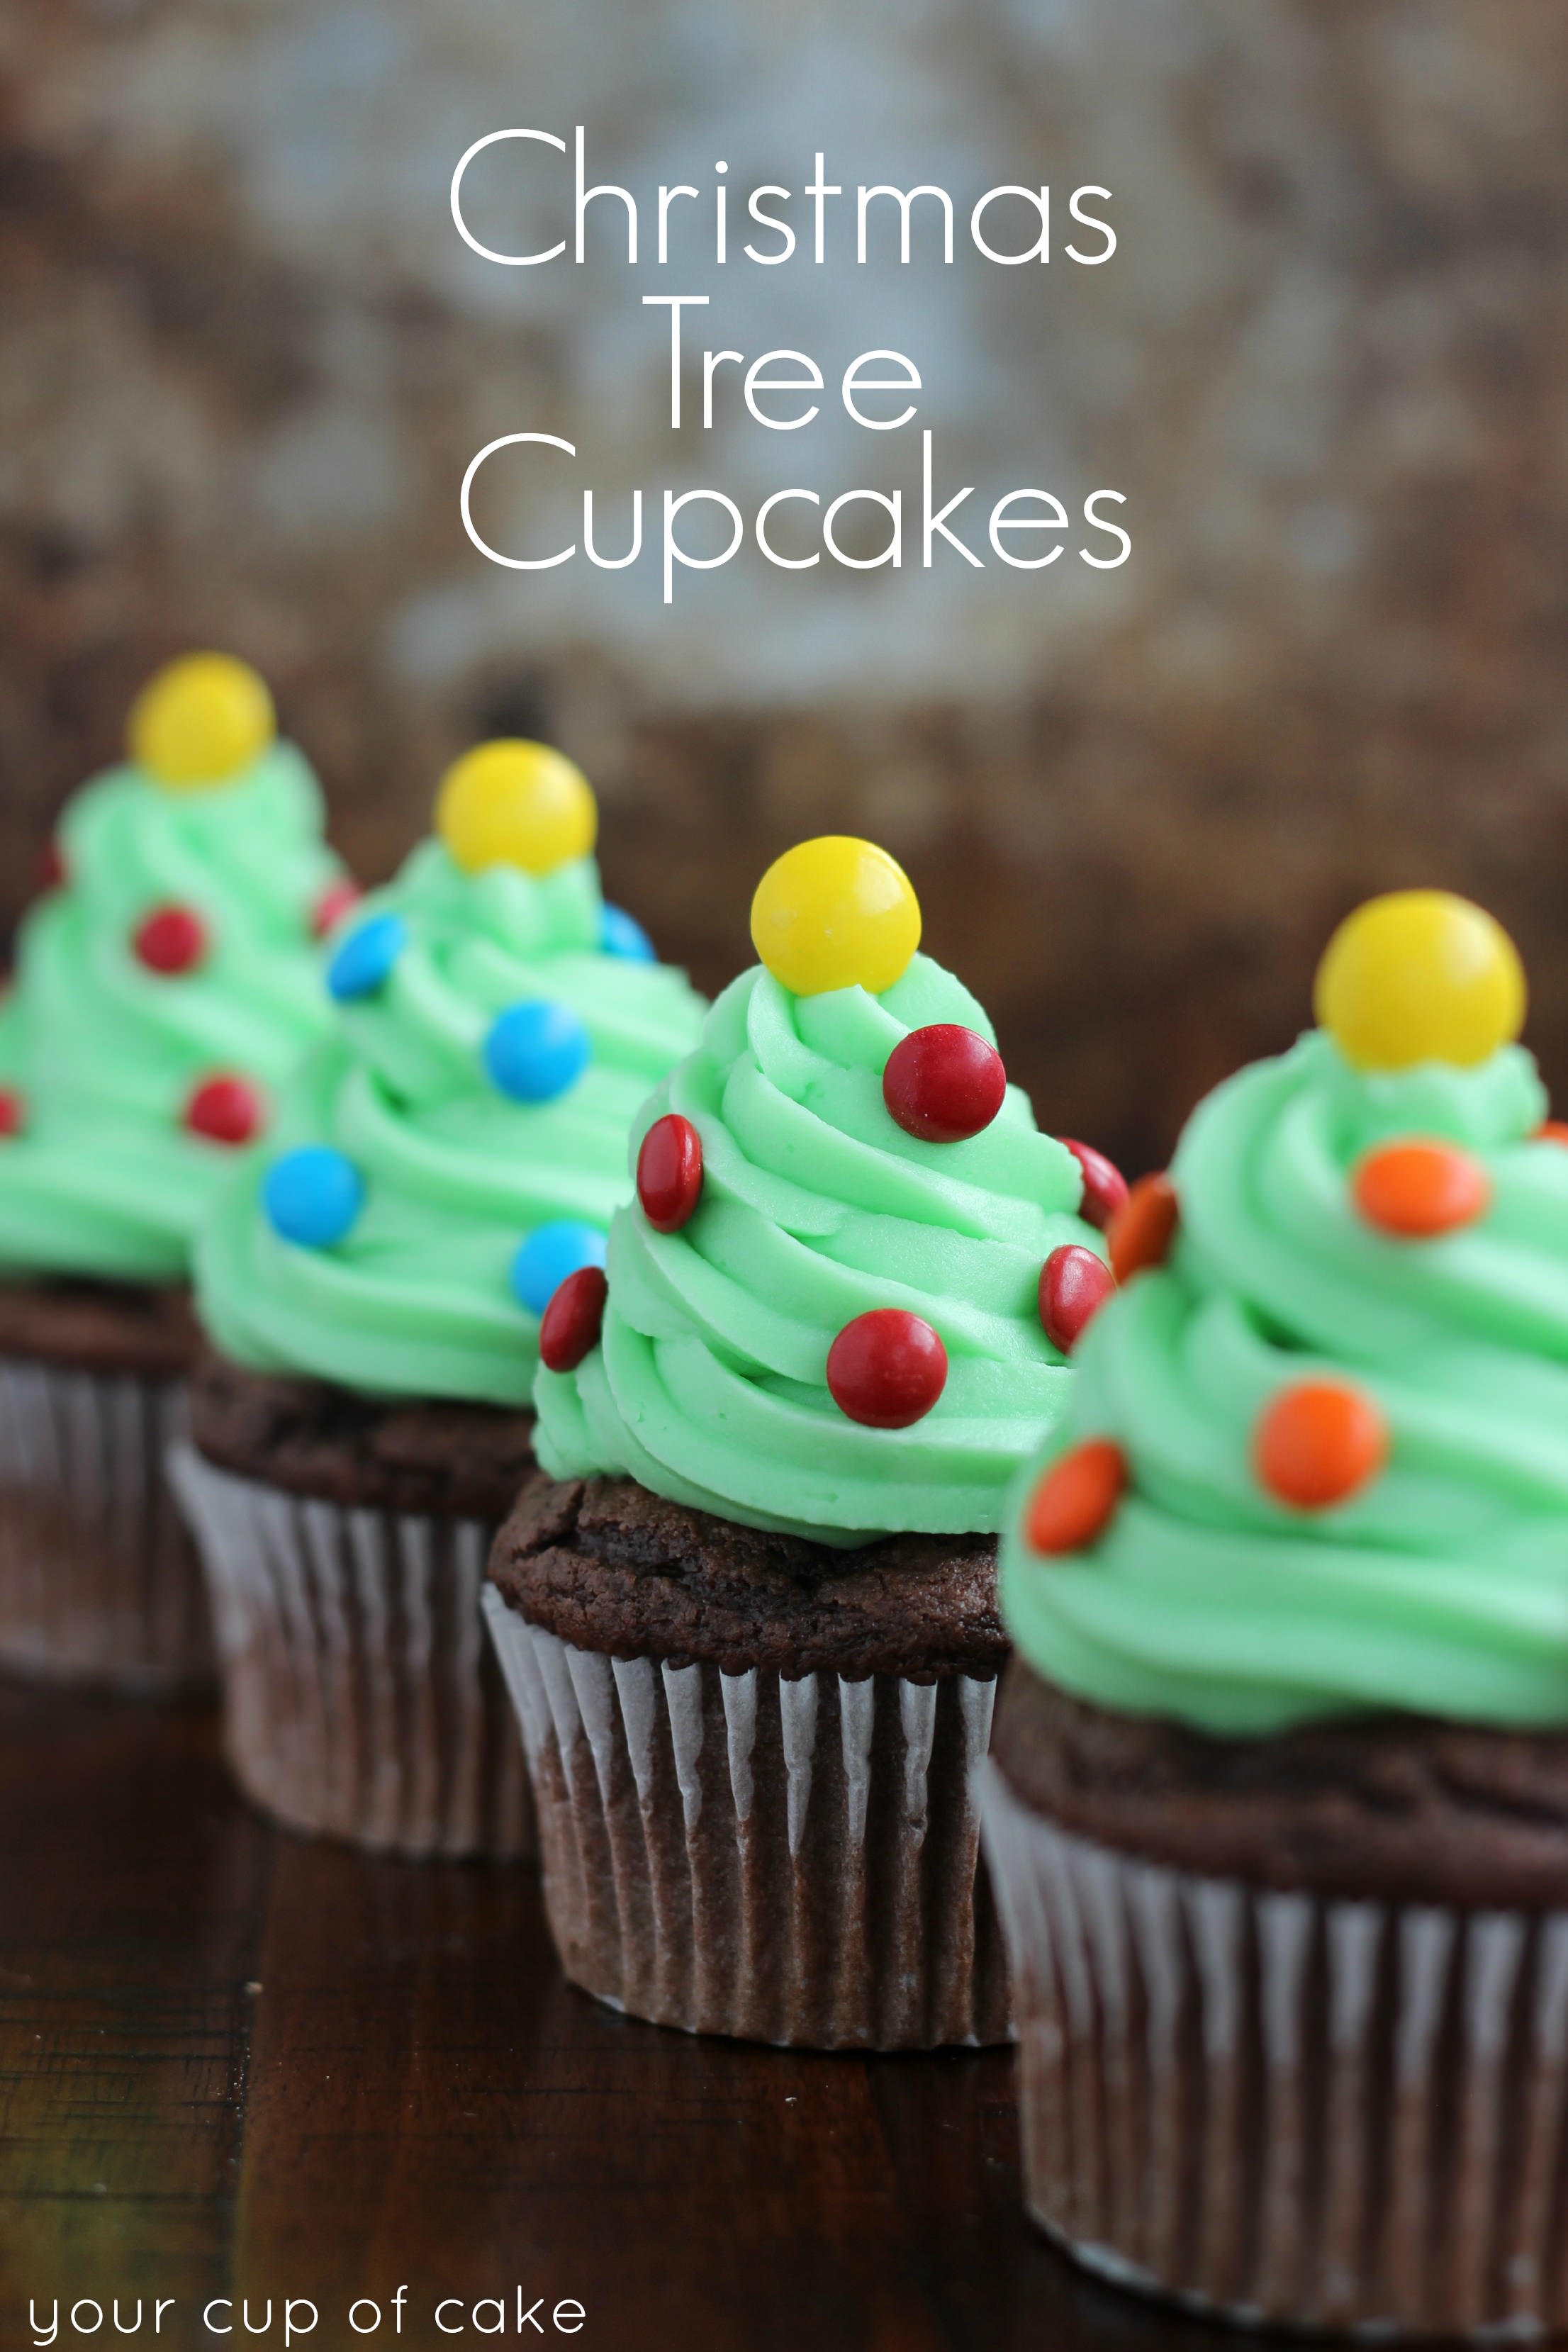 Easy Cupcake Decorating for Christmas - Your Cup of Cake